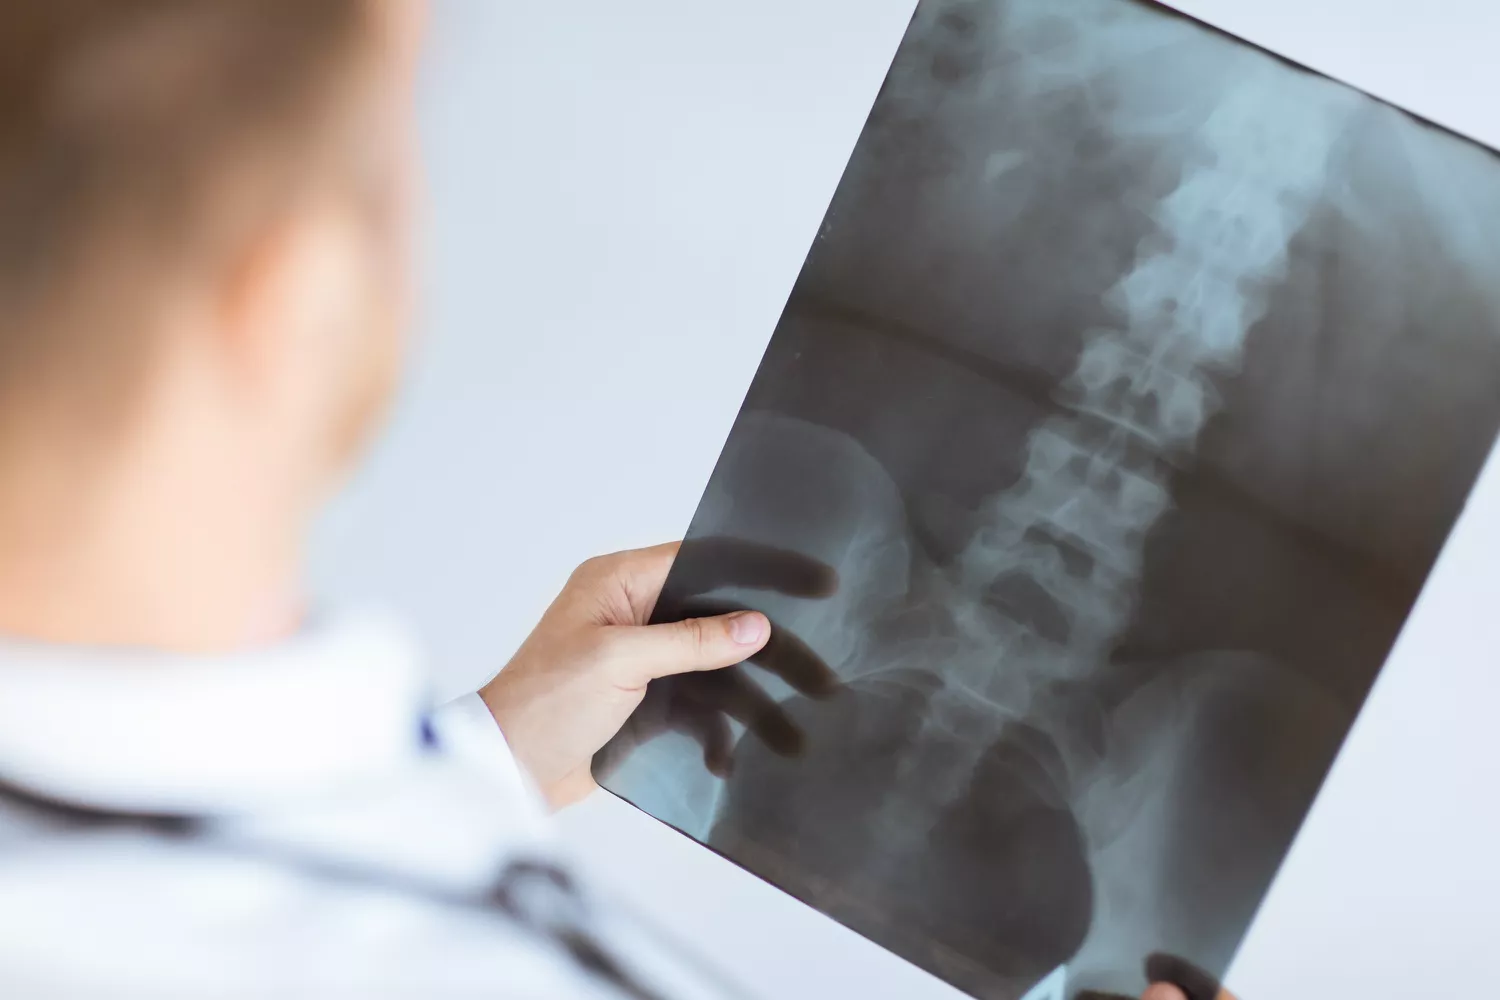 An Overview of Spinal Lesions